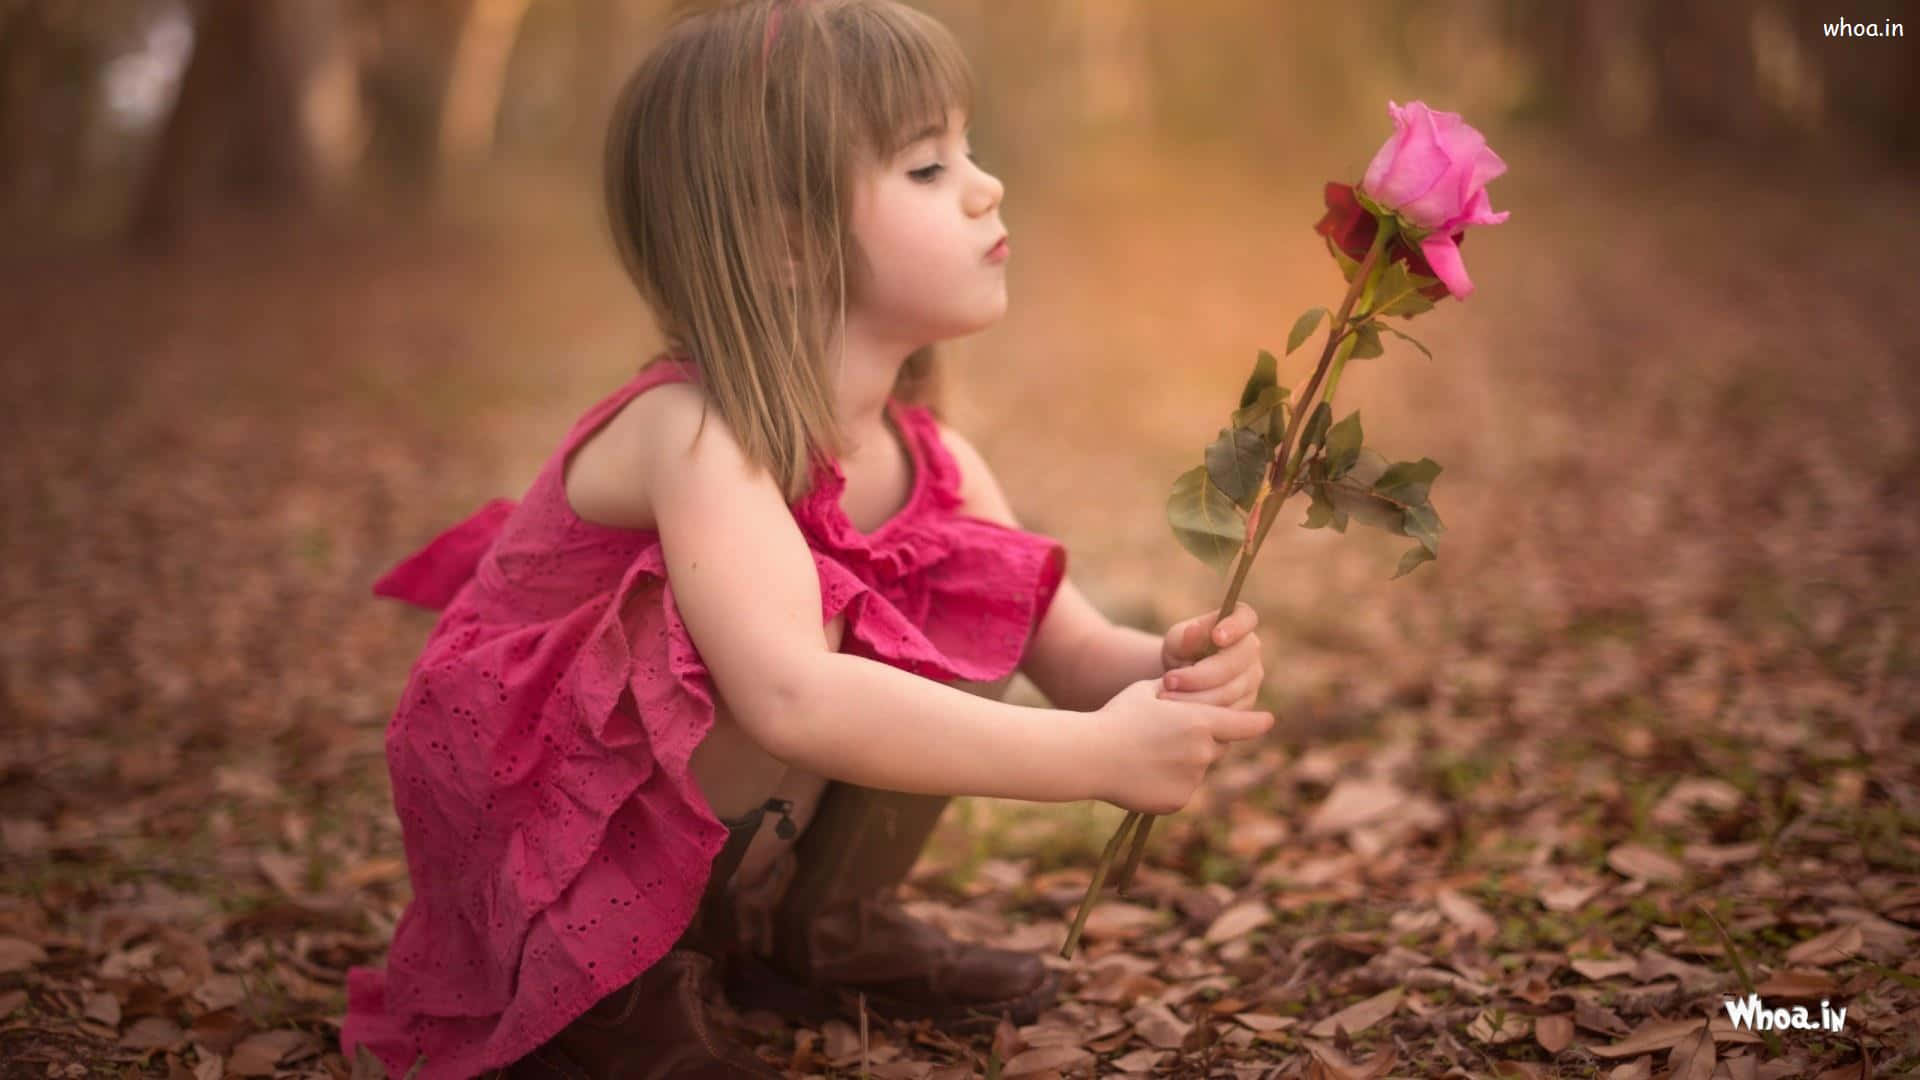 A Little Girl Is Holding A Pink Rose In The Woods Wallpaper